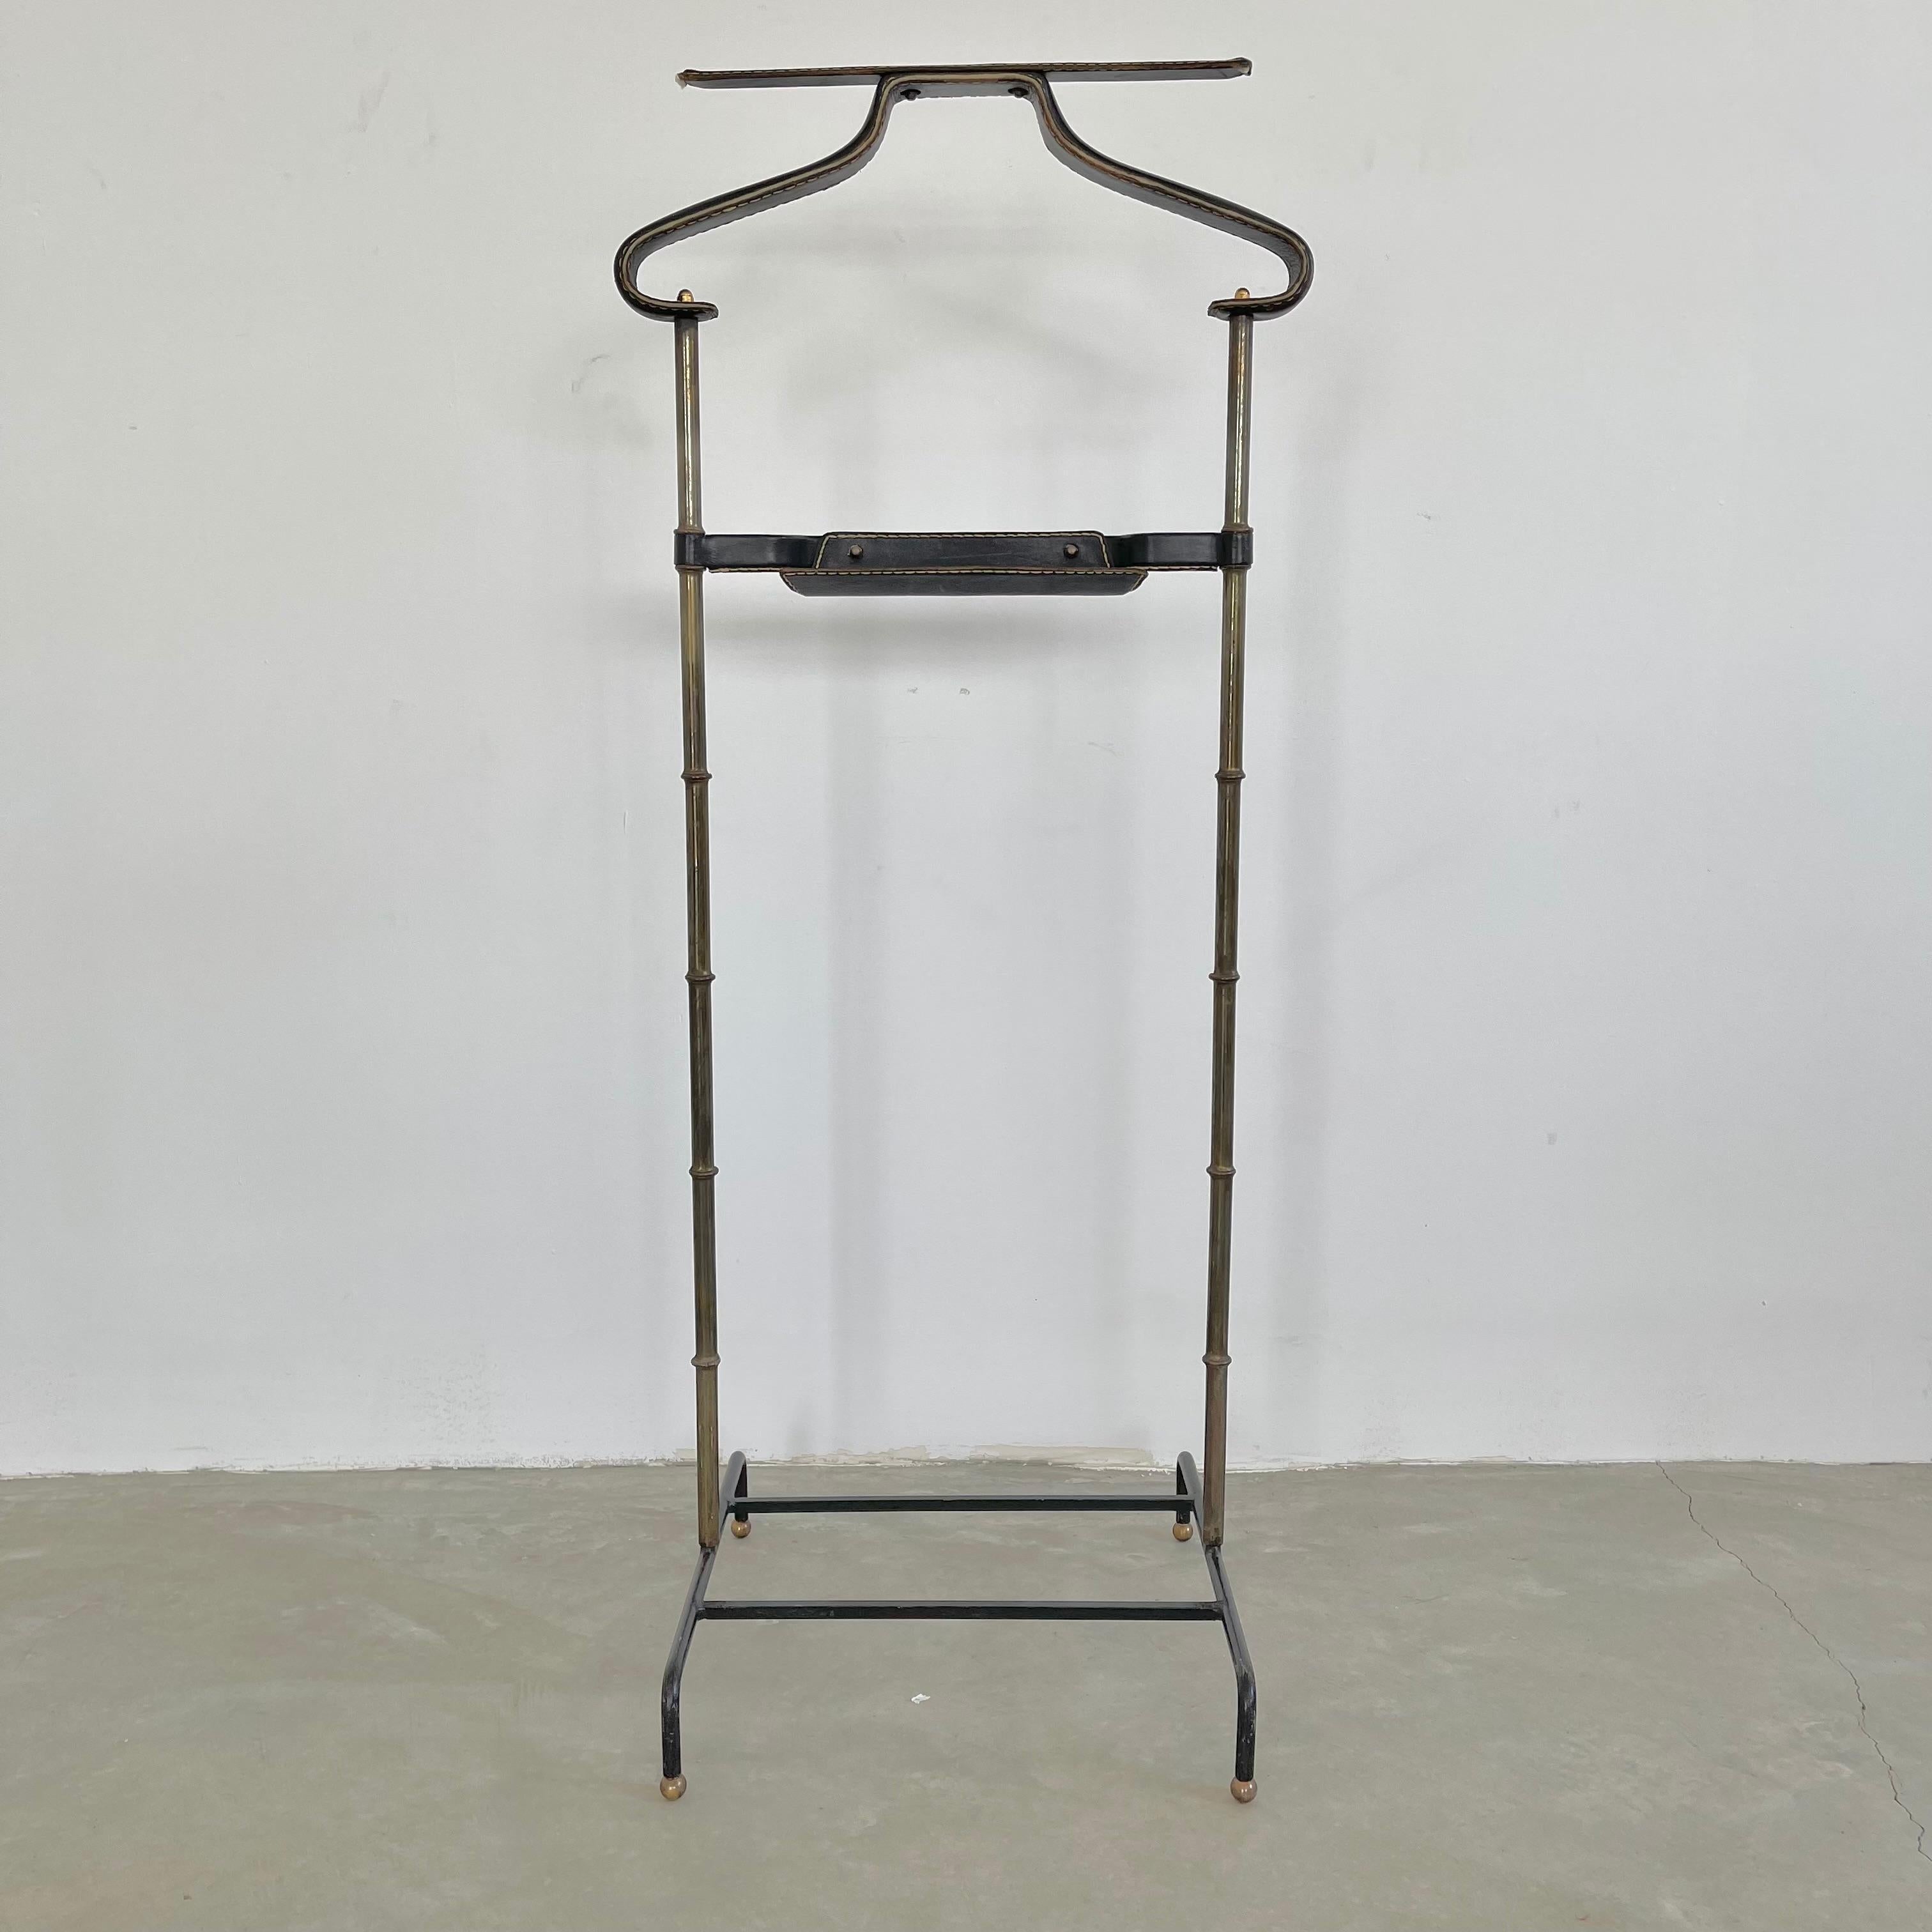 Handsome coat stand / valet by Jacques Adnet. Valet has an iron base, brass frame in a bamboo design and a leather wrapped catch all and coat/pant holder. Leather has signature Adnet contrast stitching. Beautiful vintage condition. Great piece of